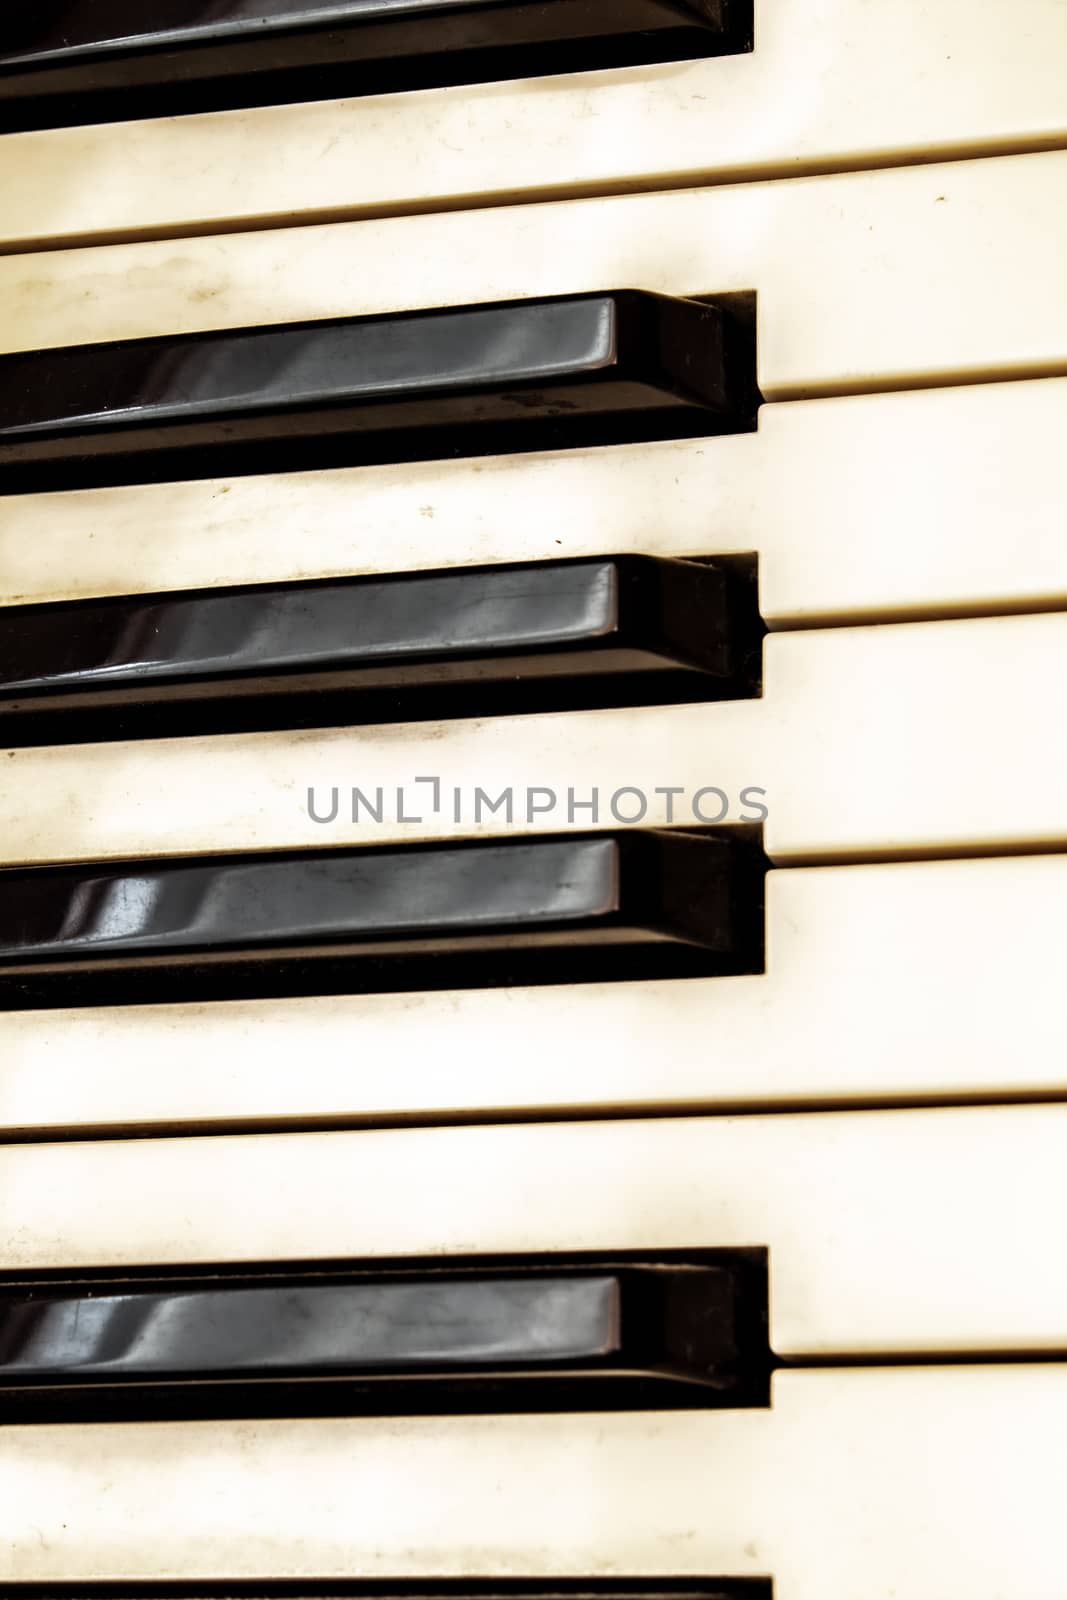 Black and white piano keys. Musical instrument.